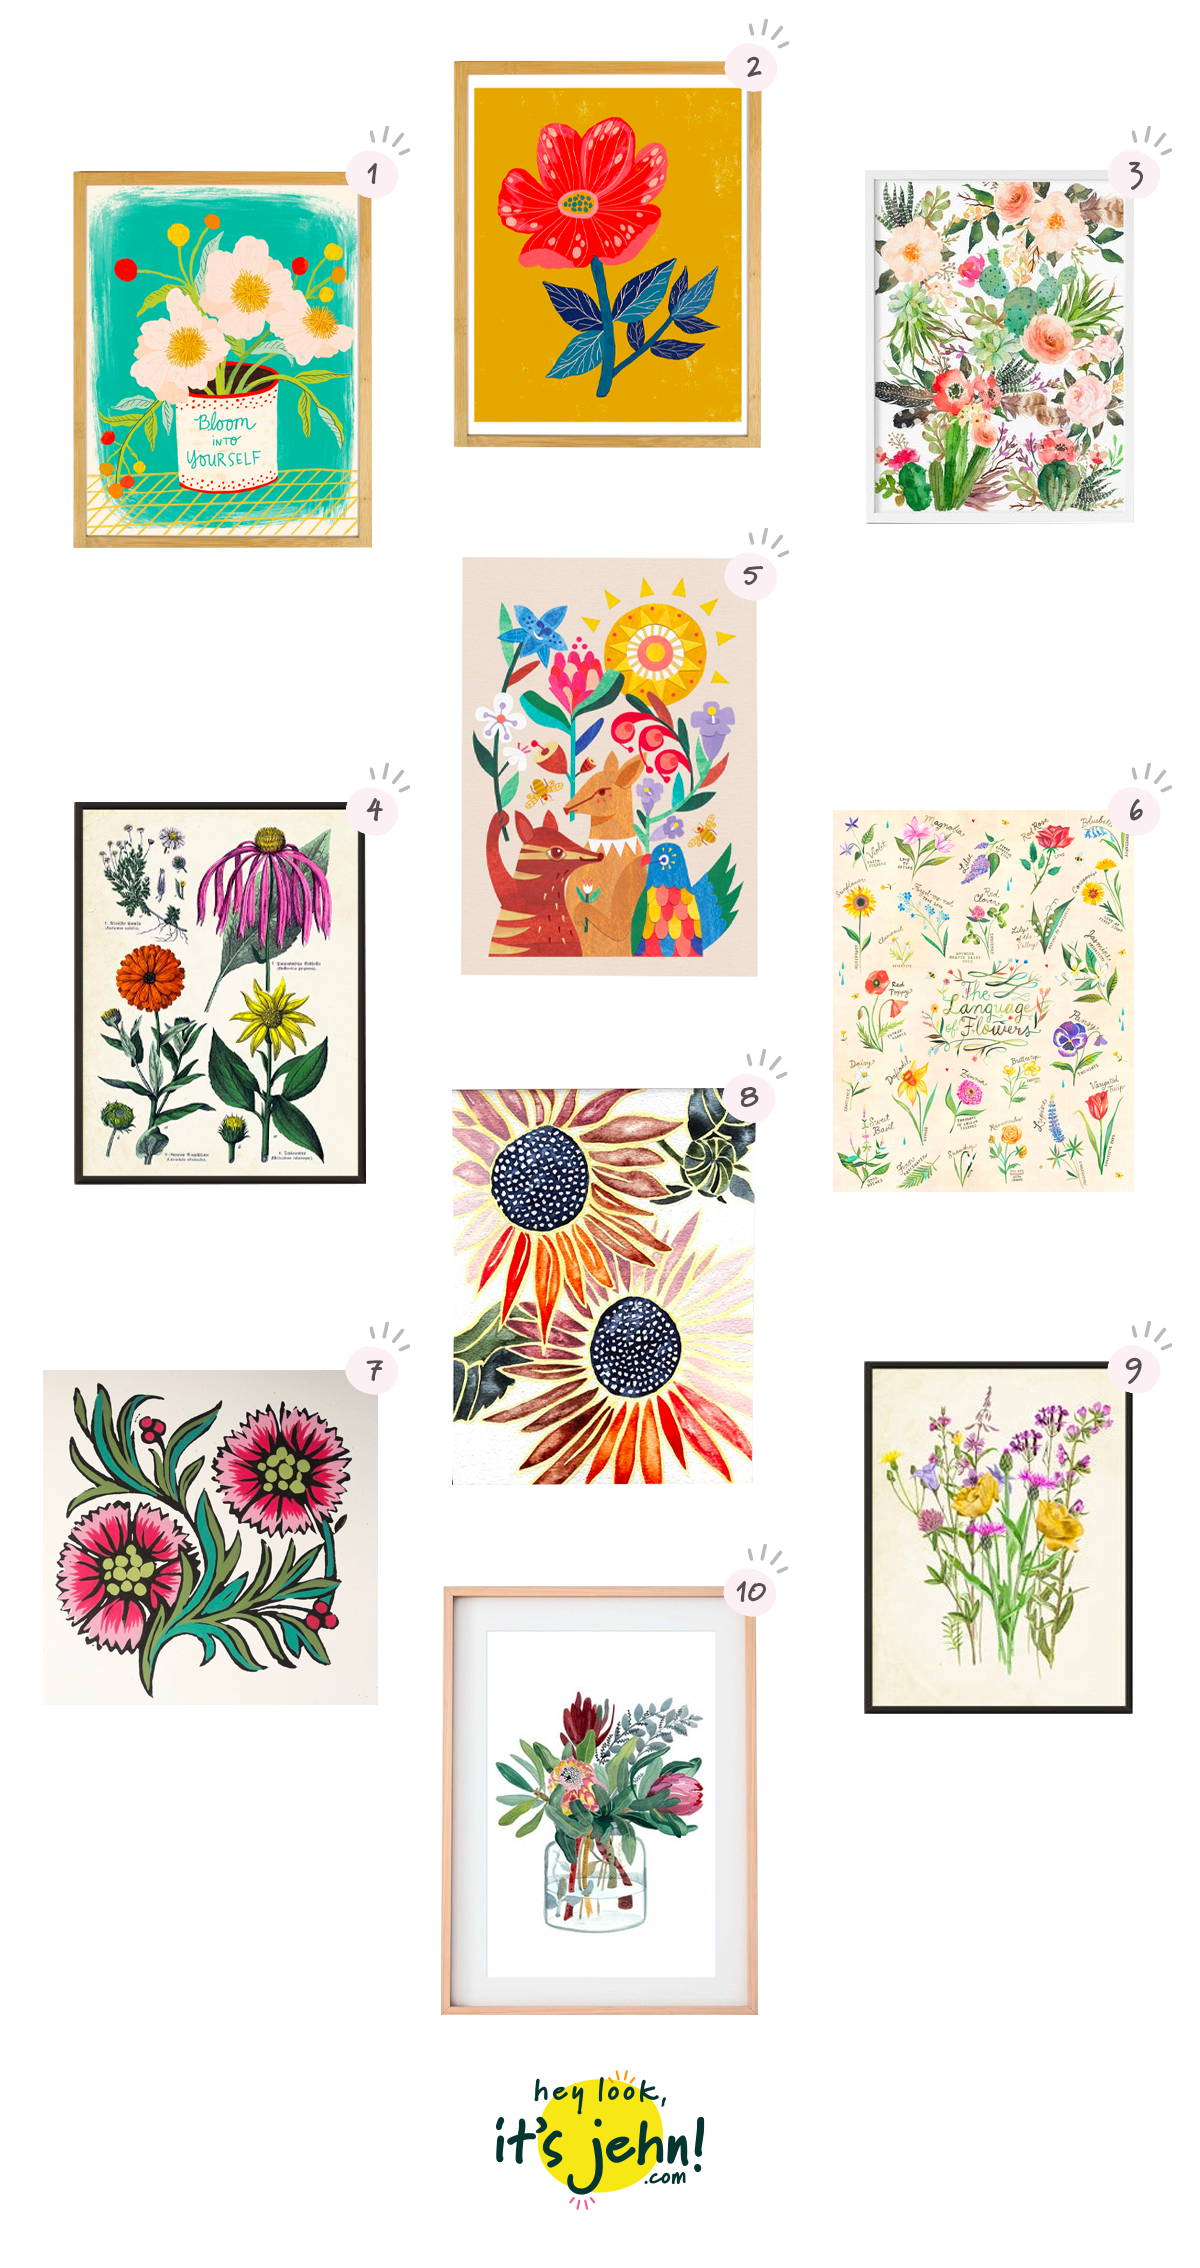 10 floral art prints from Etsy arranged on a white background